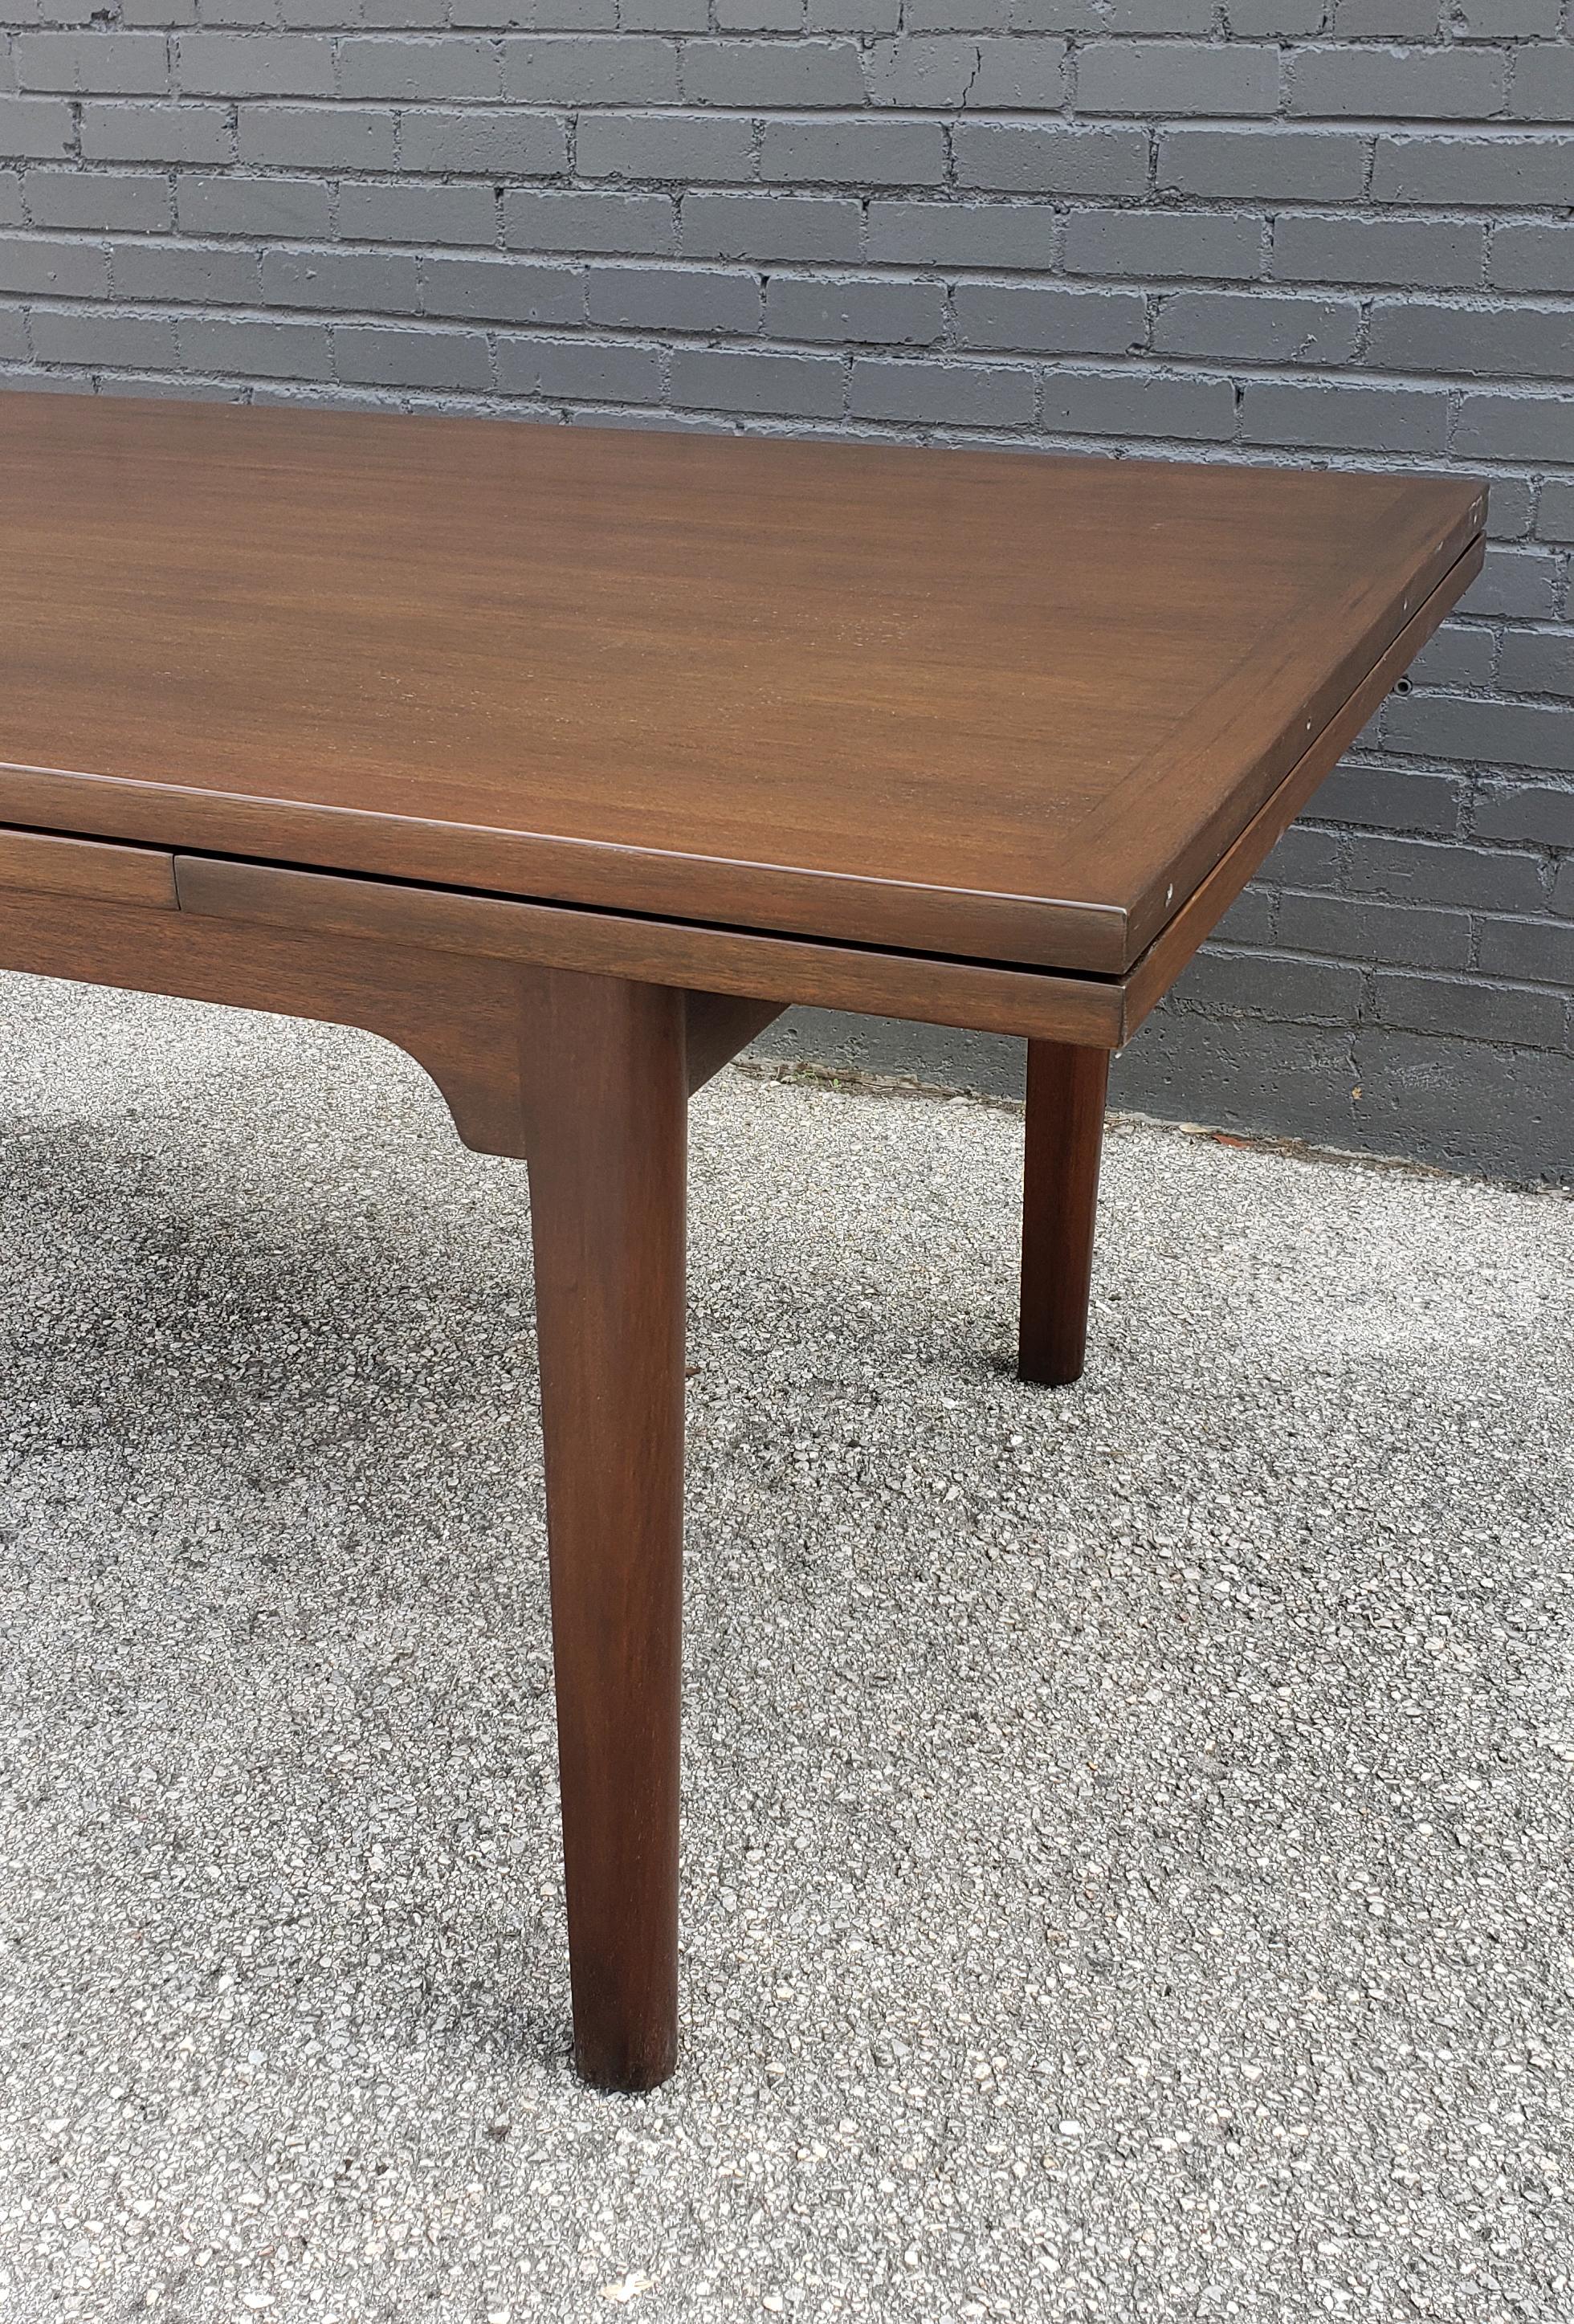 Dunbar Dining Table by Edward Wormley with Retractable Leaves Mahogany, 1950s 3